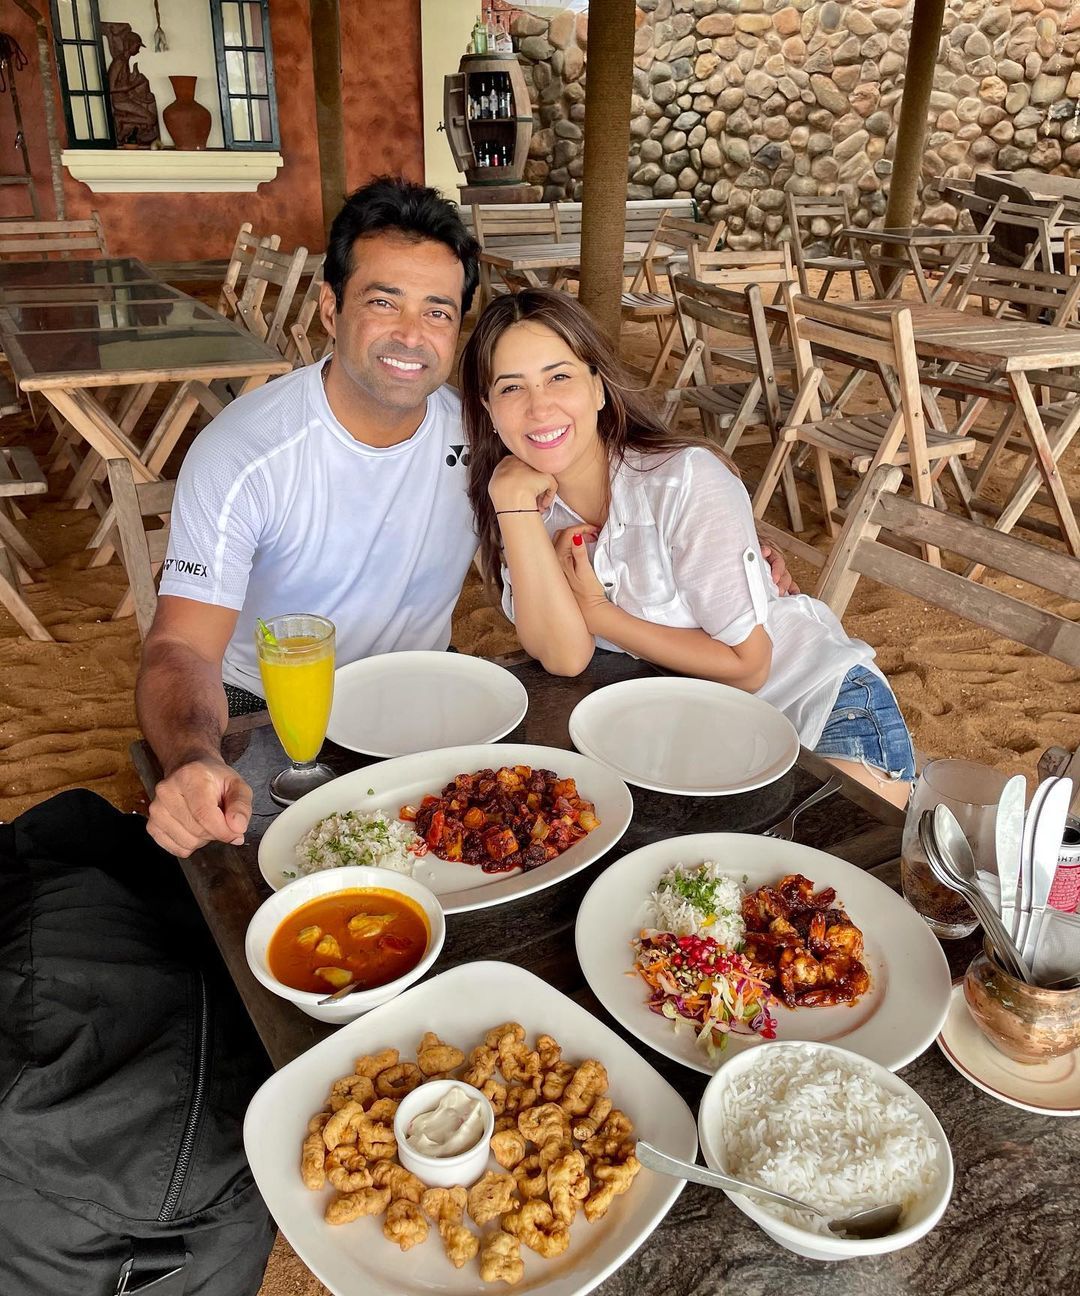 Leander Paes and Kim Sharma's cosy pictures from their Goa vacation spark relationship rumours